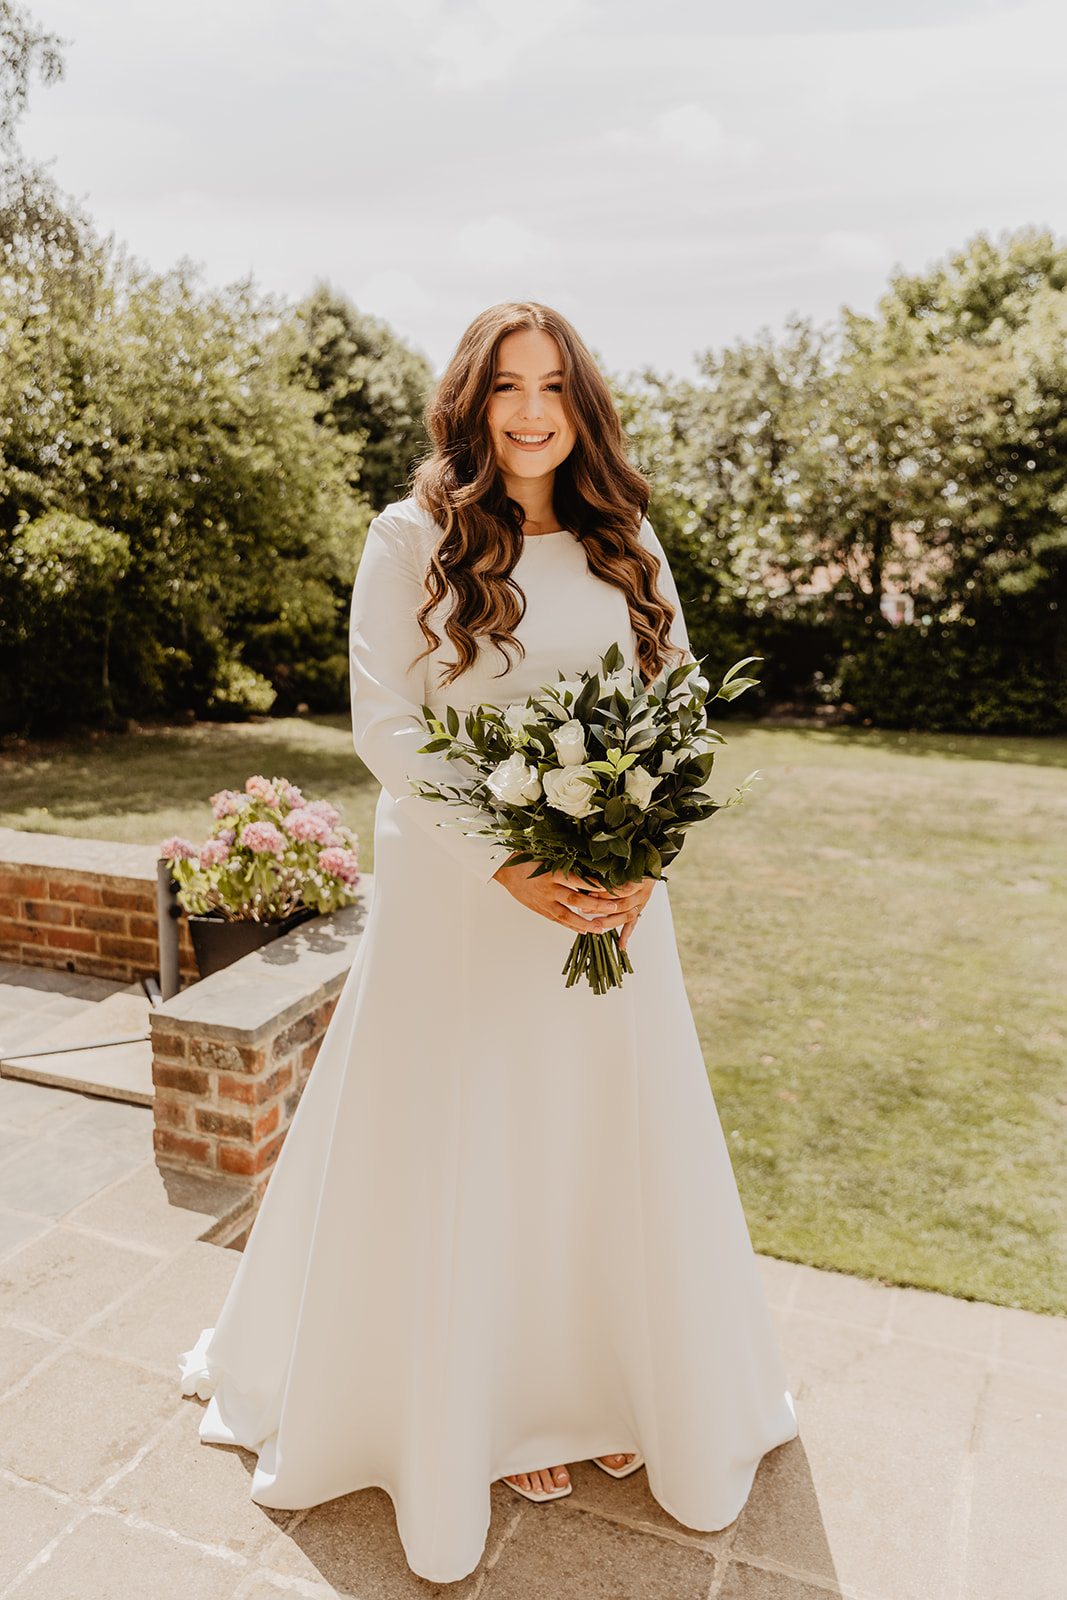 Bride with bouquet at a Field Place Manor House Wedding in Worthing, Sussex. By Olive Joy Photography